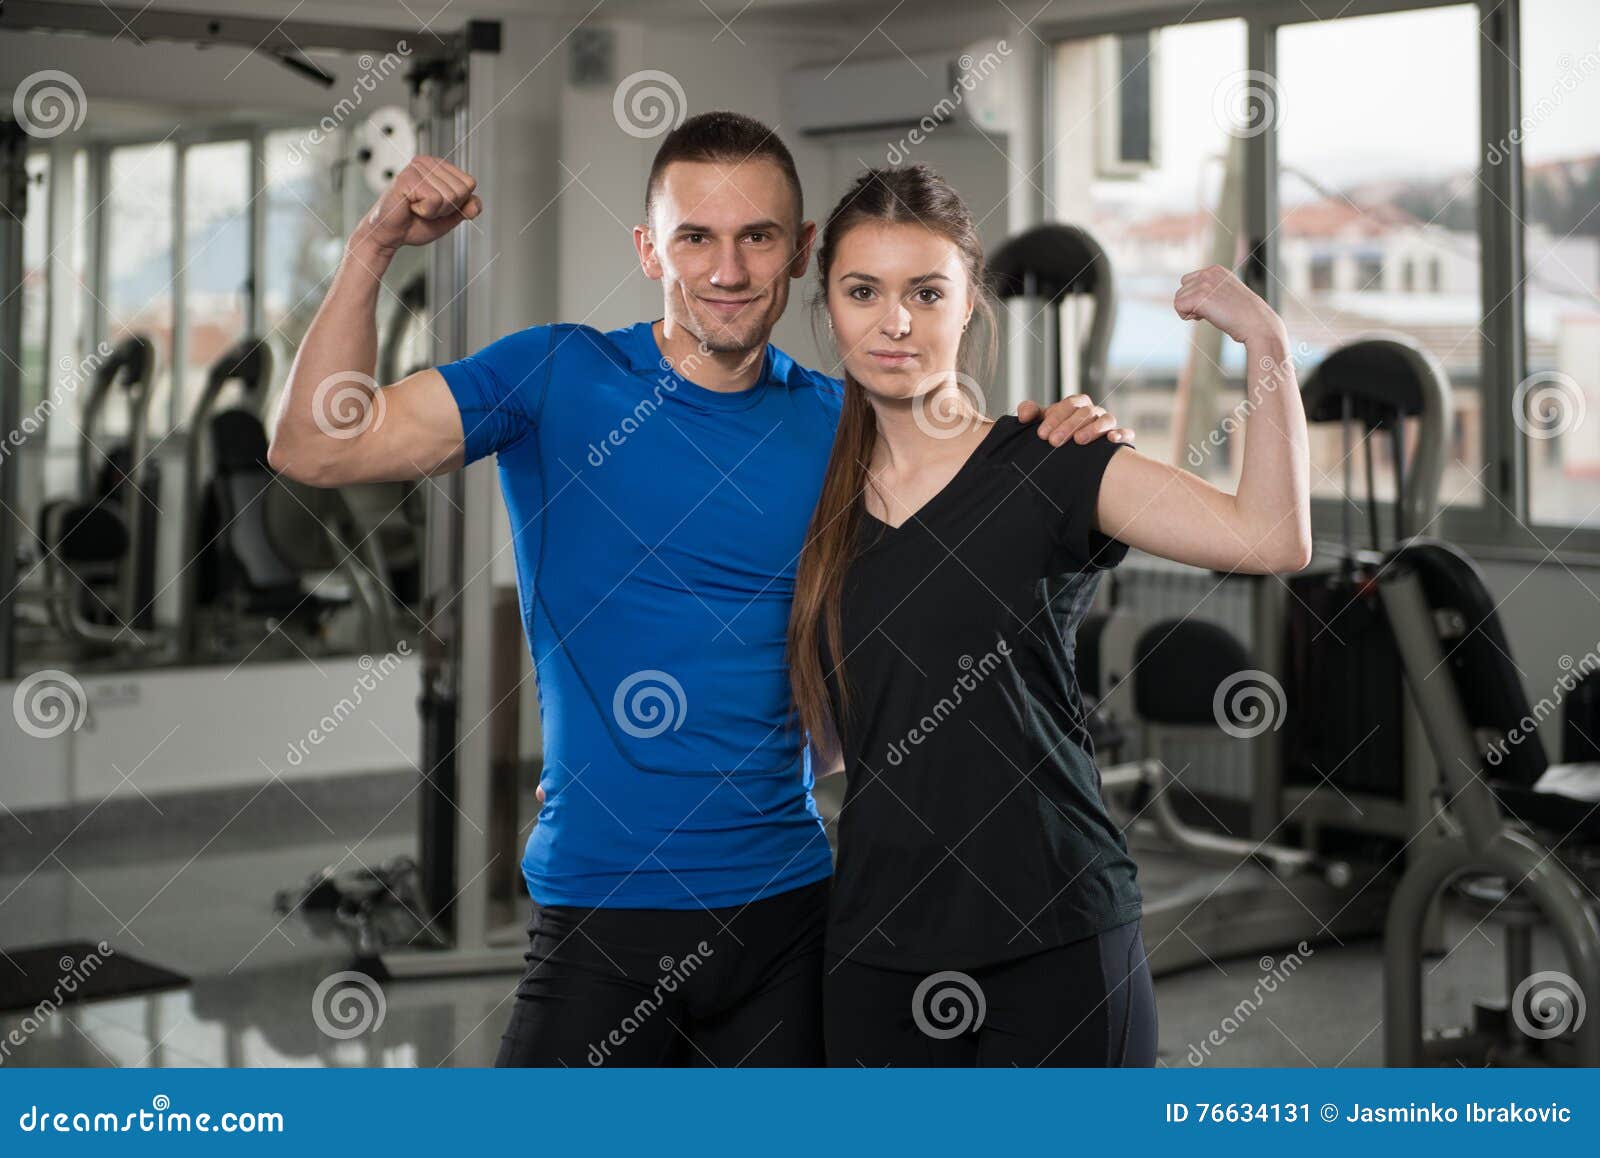 fit-couple-gym-looking-very-attractive-portrait-together-standing-positive-76634131.jpg